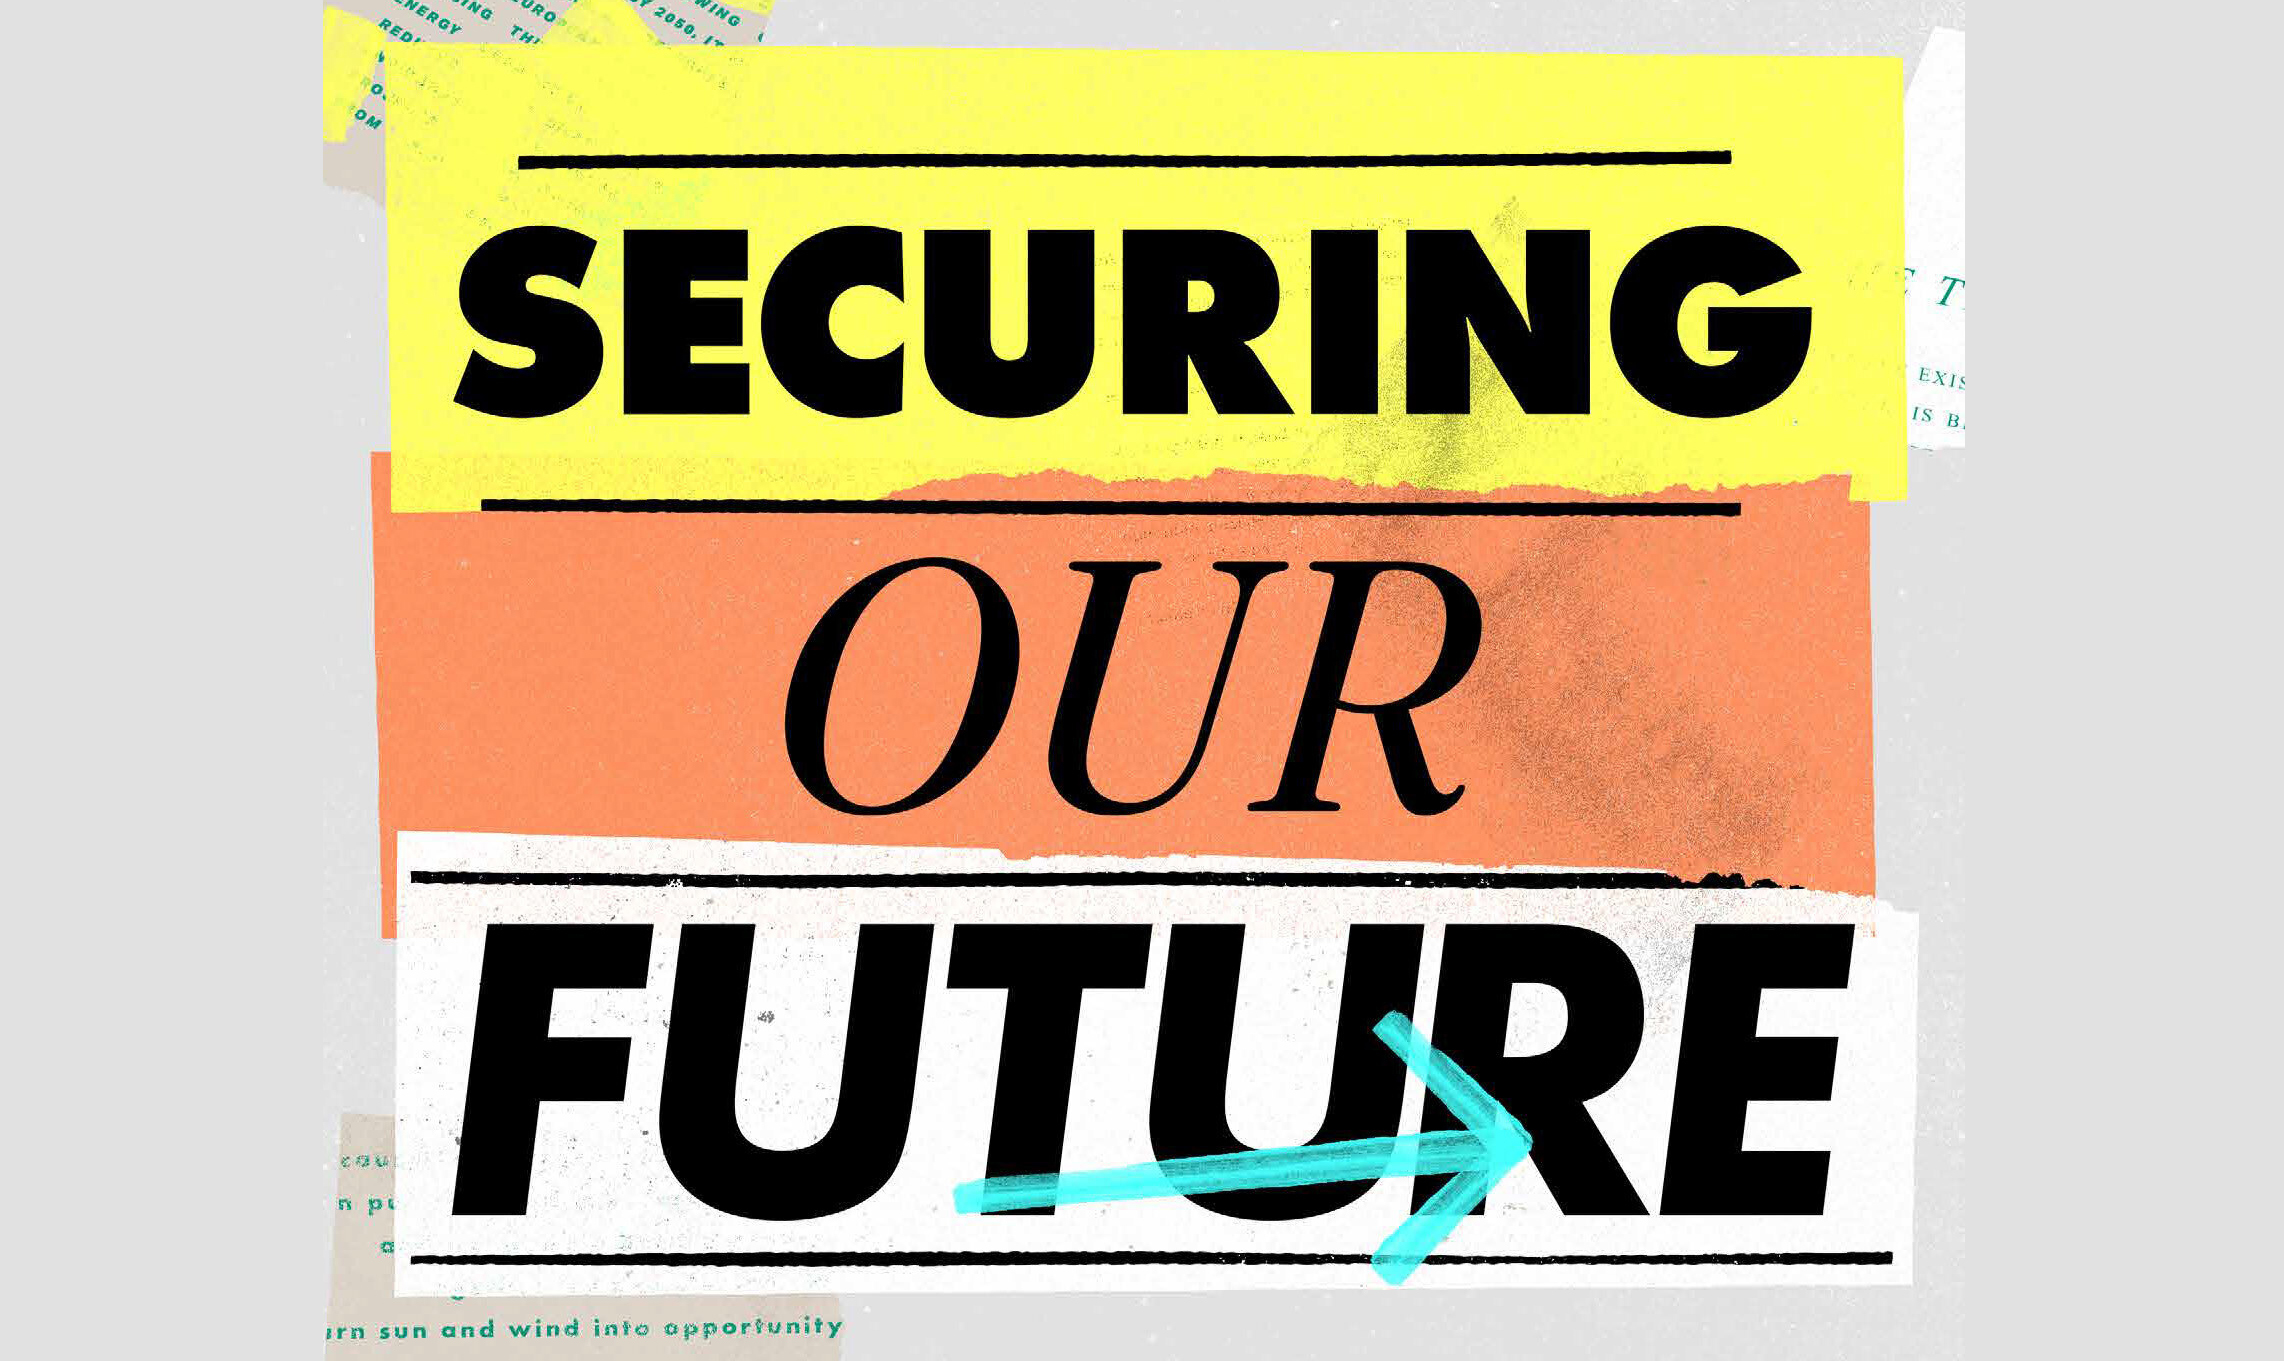 Securing our future cover article